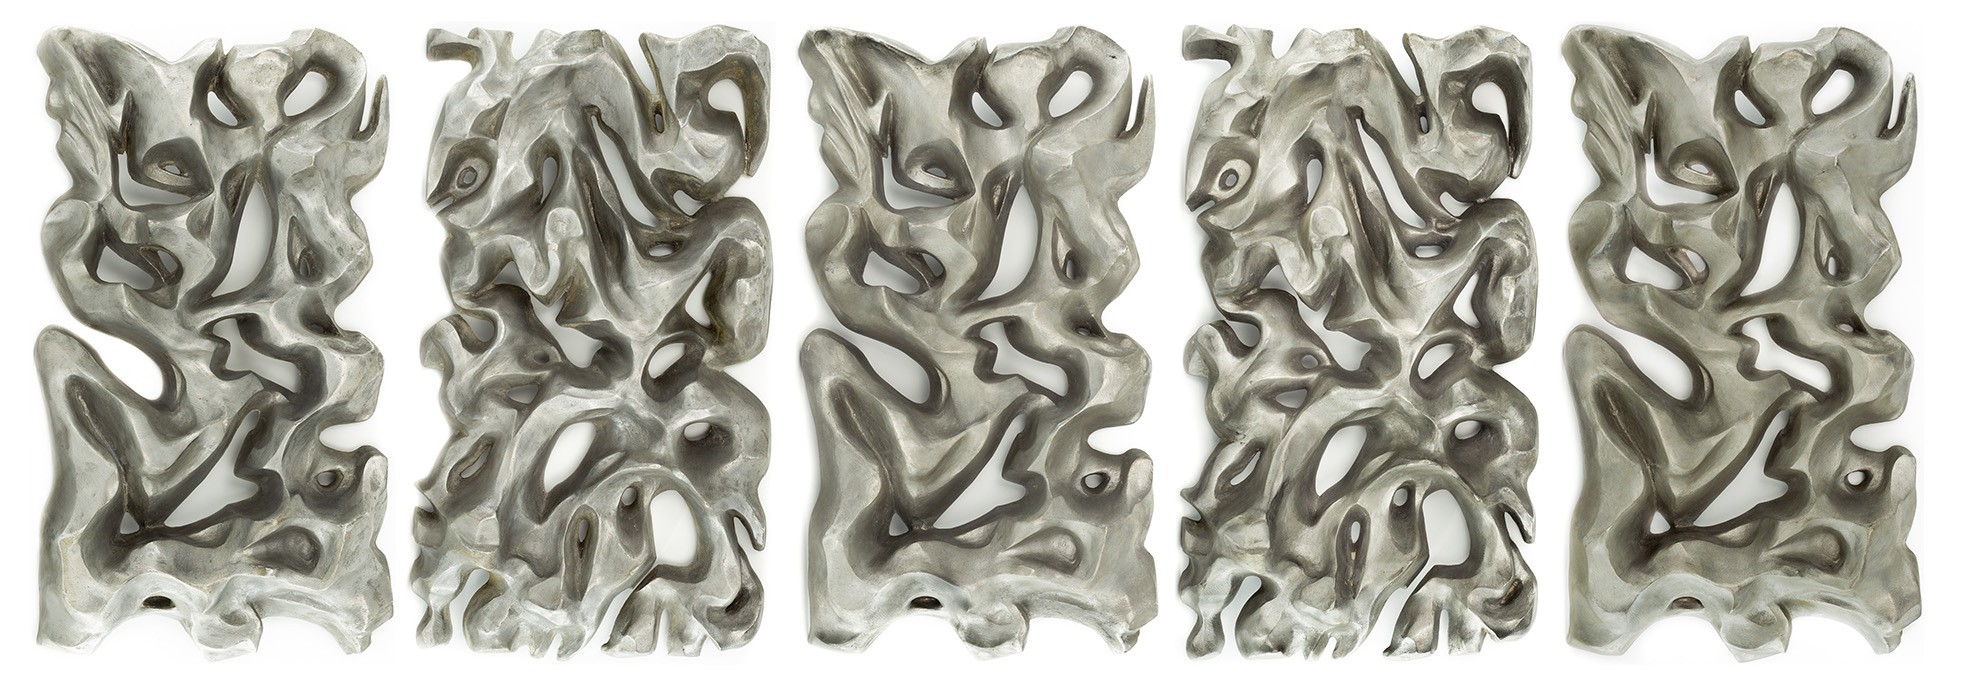 Metal Abstract Mid Century Wall Sculptures - Set of 5